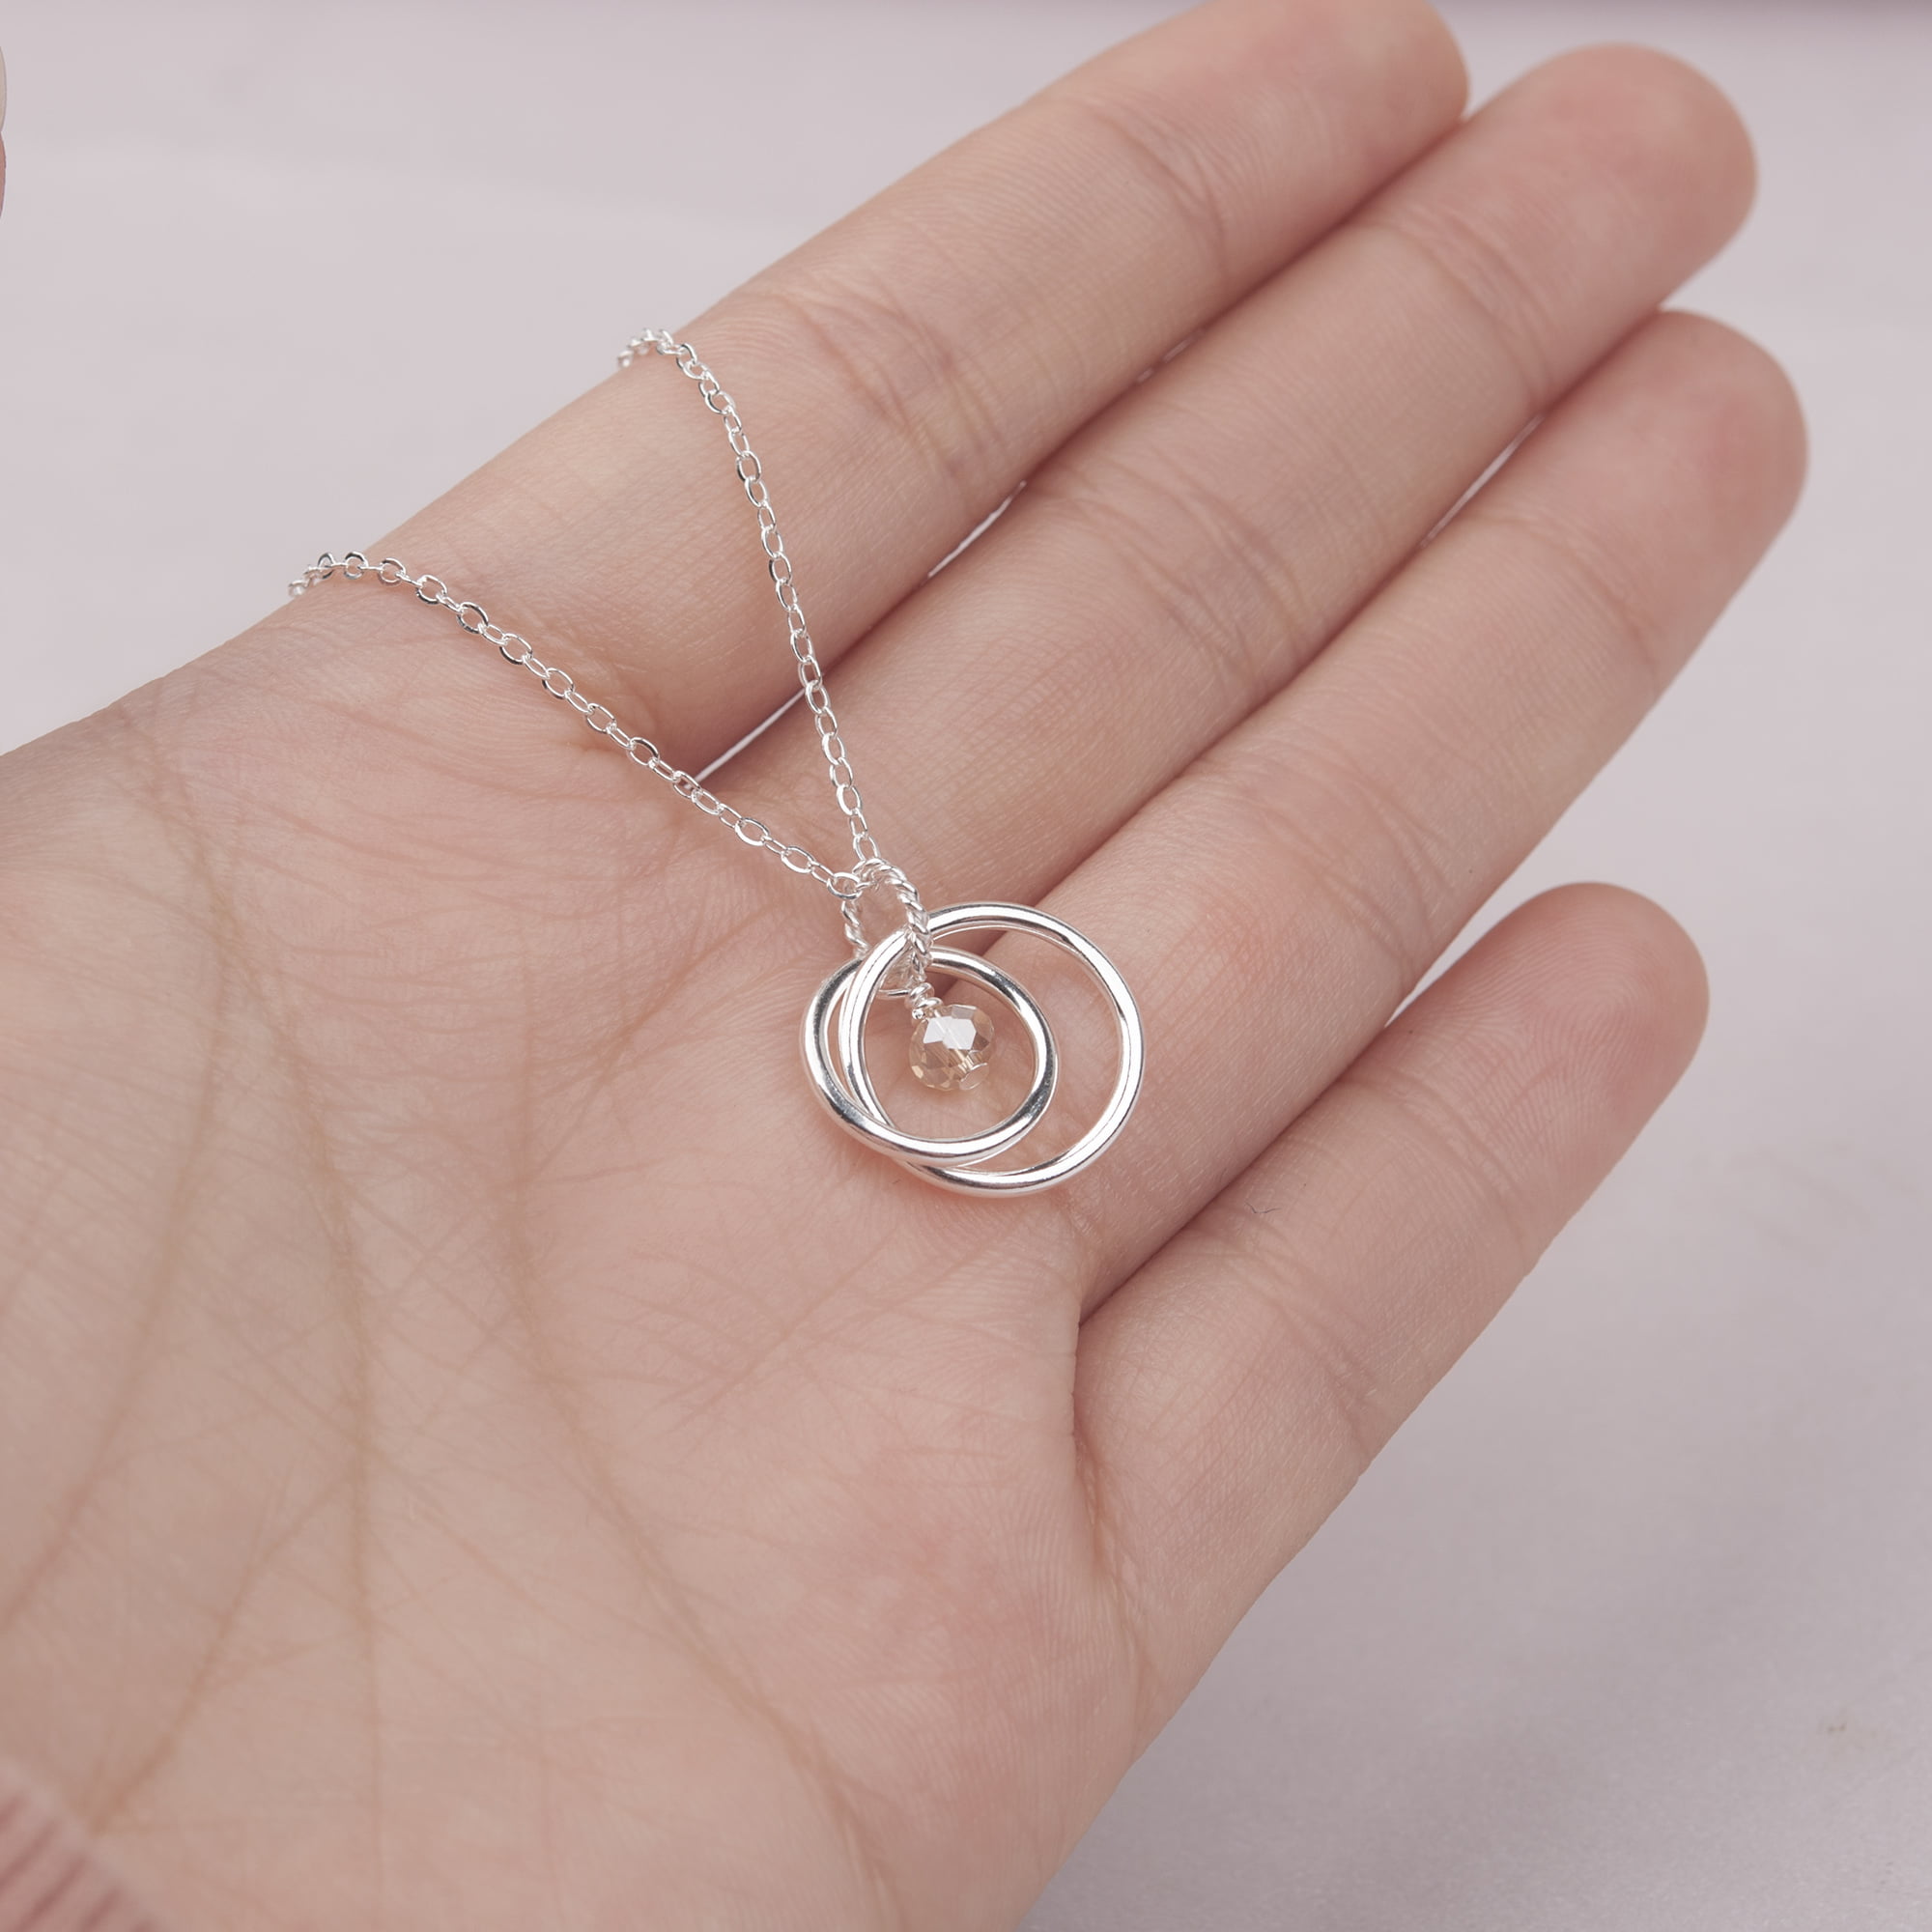 Gift for Expecting Moms Necklace: Expecting Mother Gifts, Present for Expecting Moms, Mom to Be, Pregnant Woman, 2 Interlocking Circles, Silver